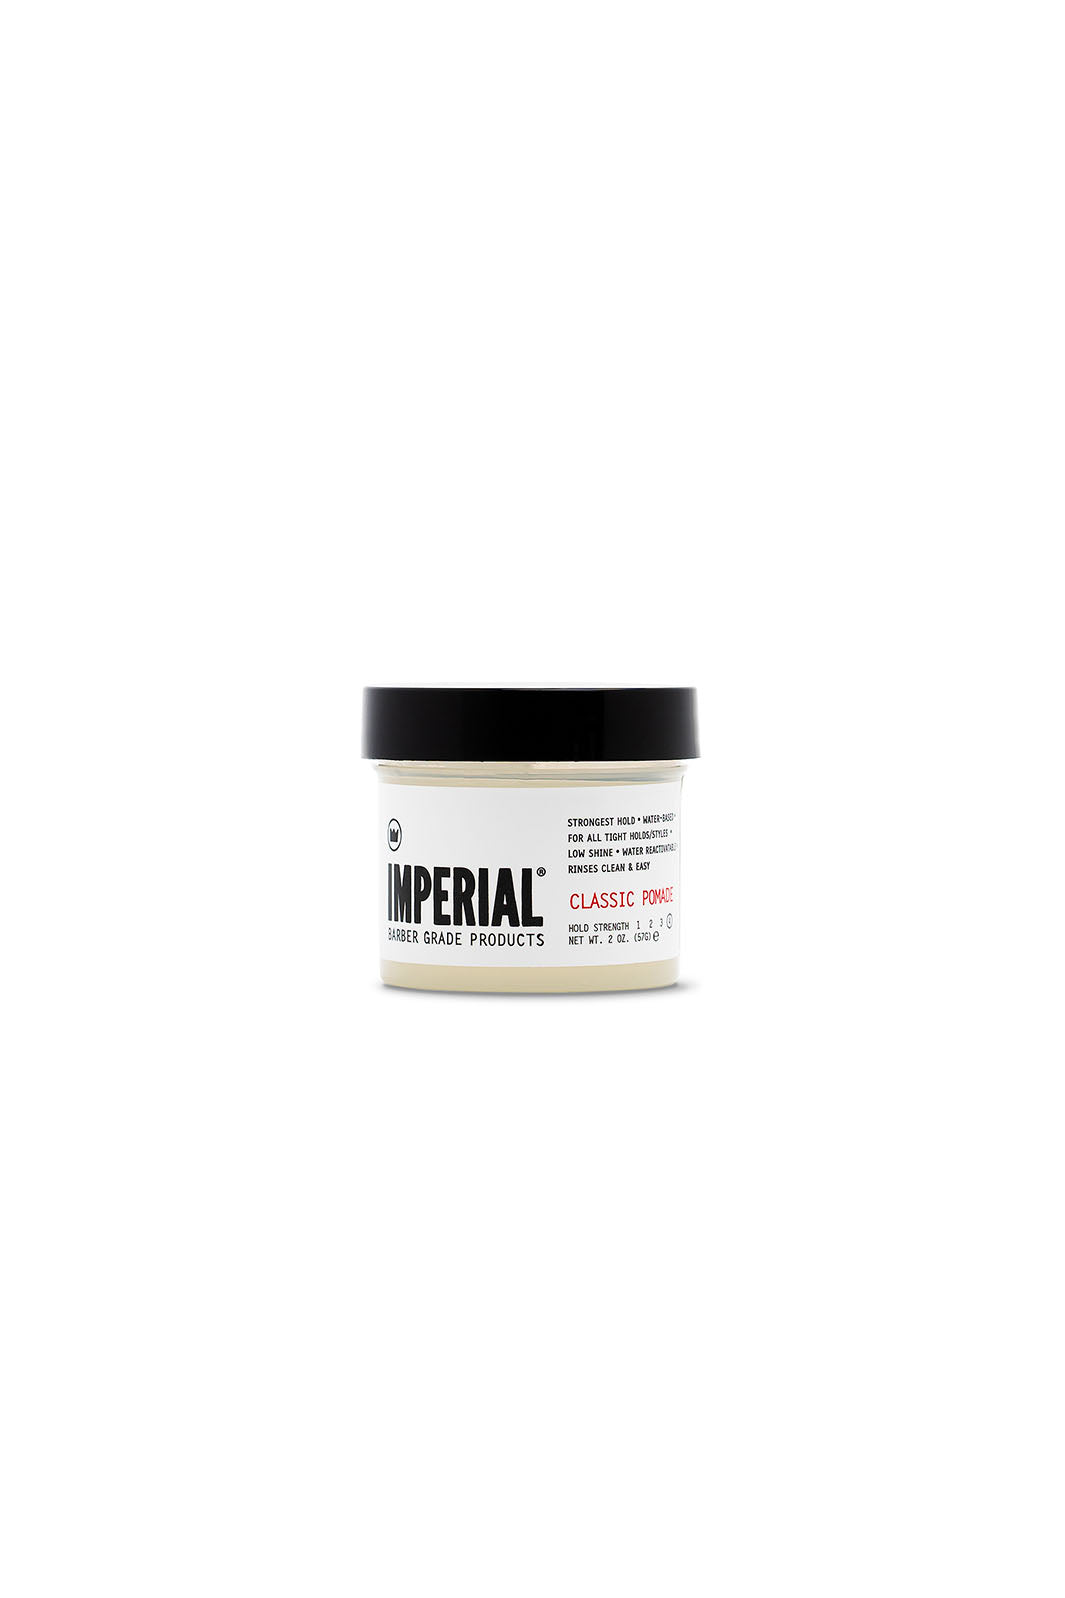 2 oz. container of Imperial Barber Grade Products Classic Pomade. Travel size hair pomade. 